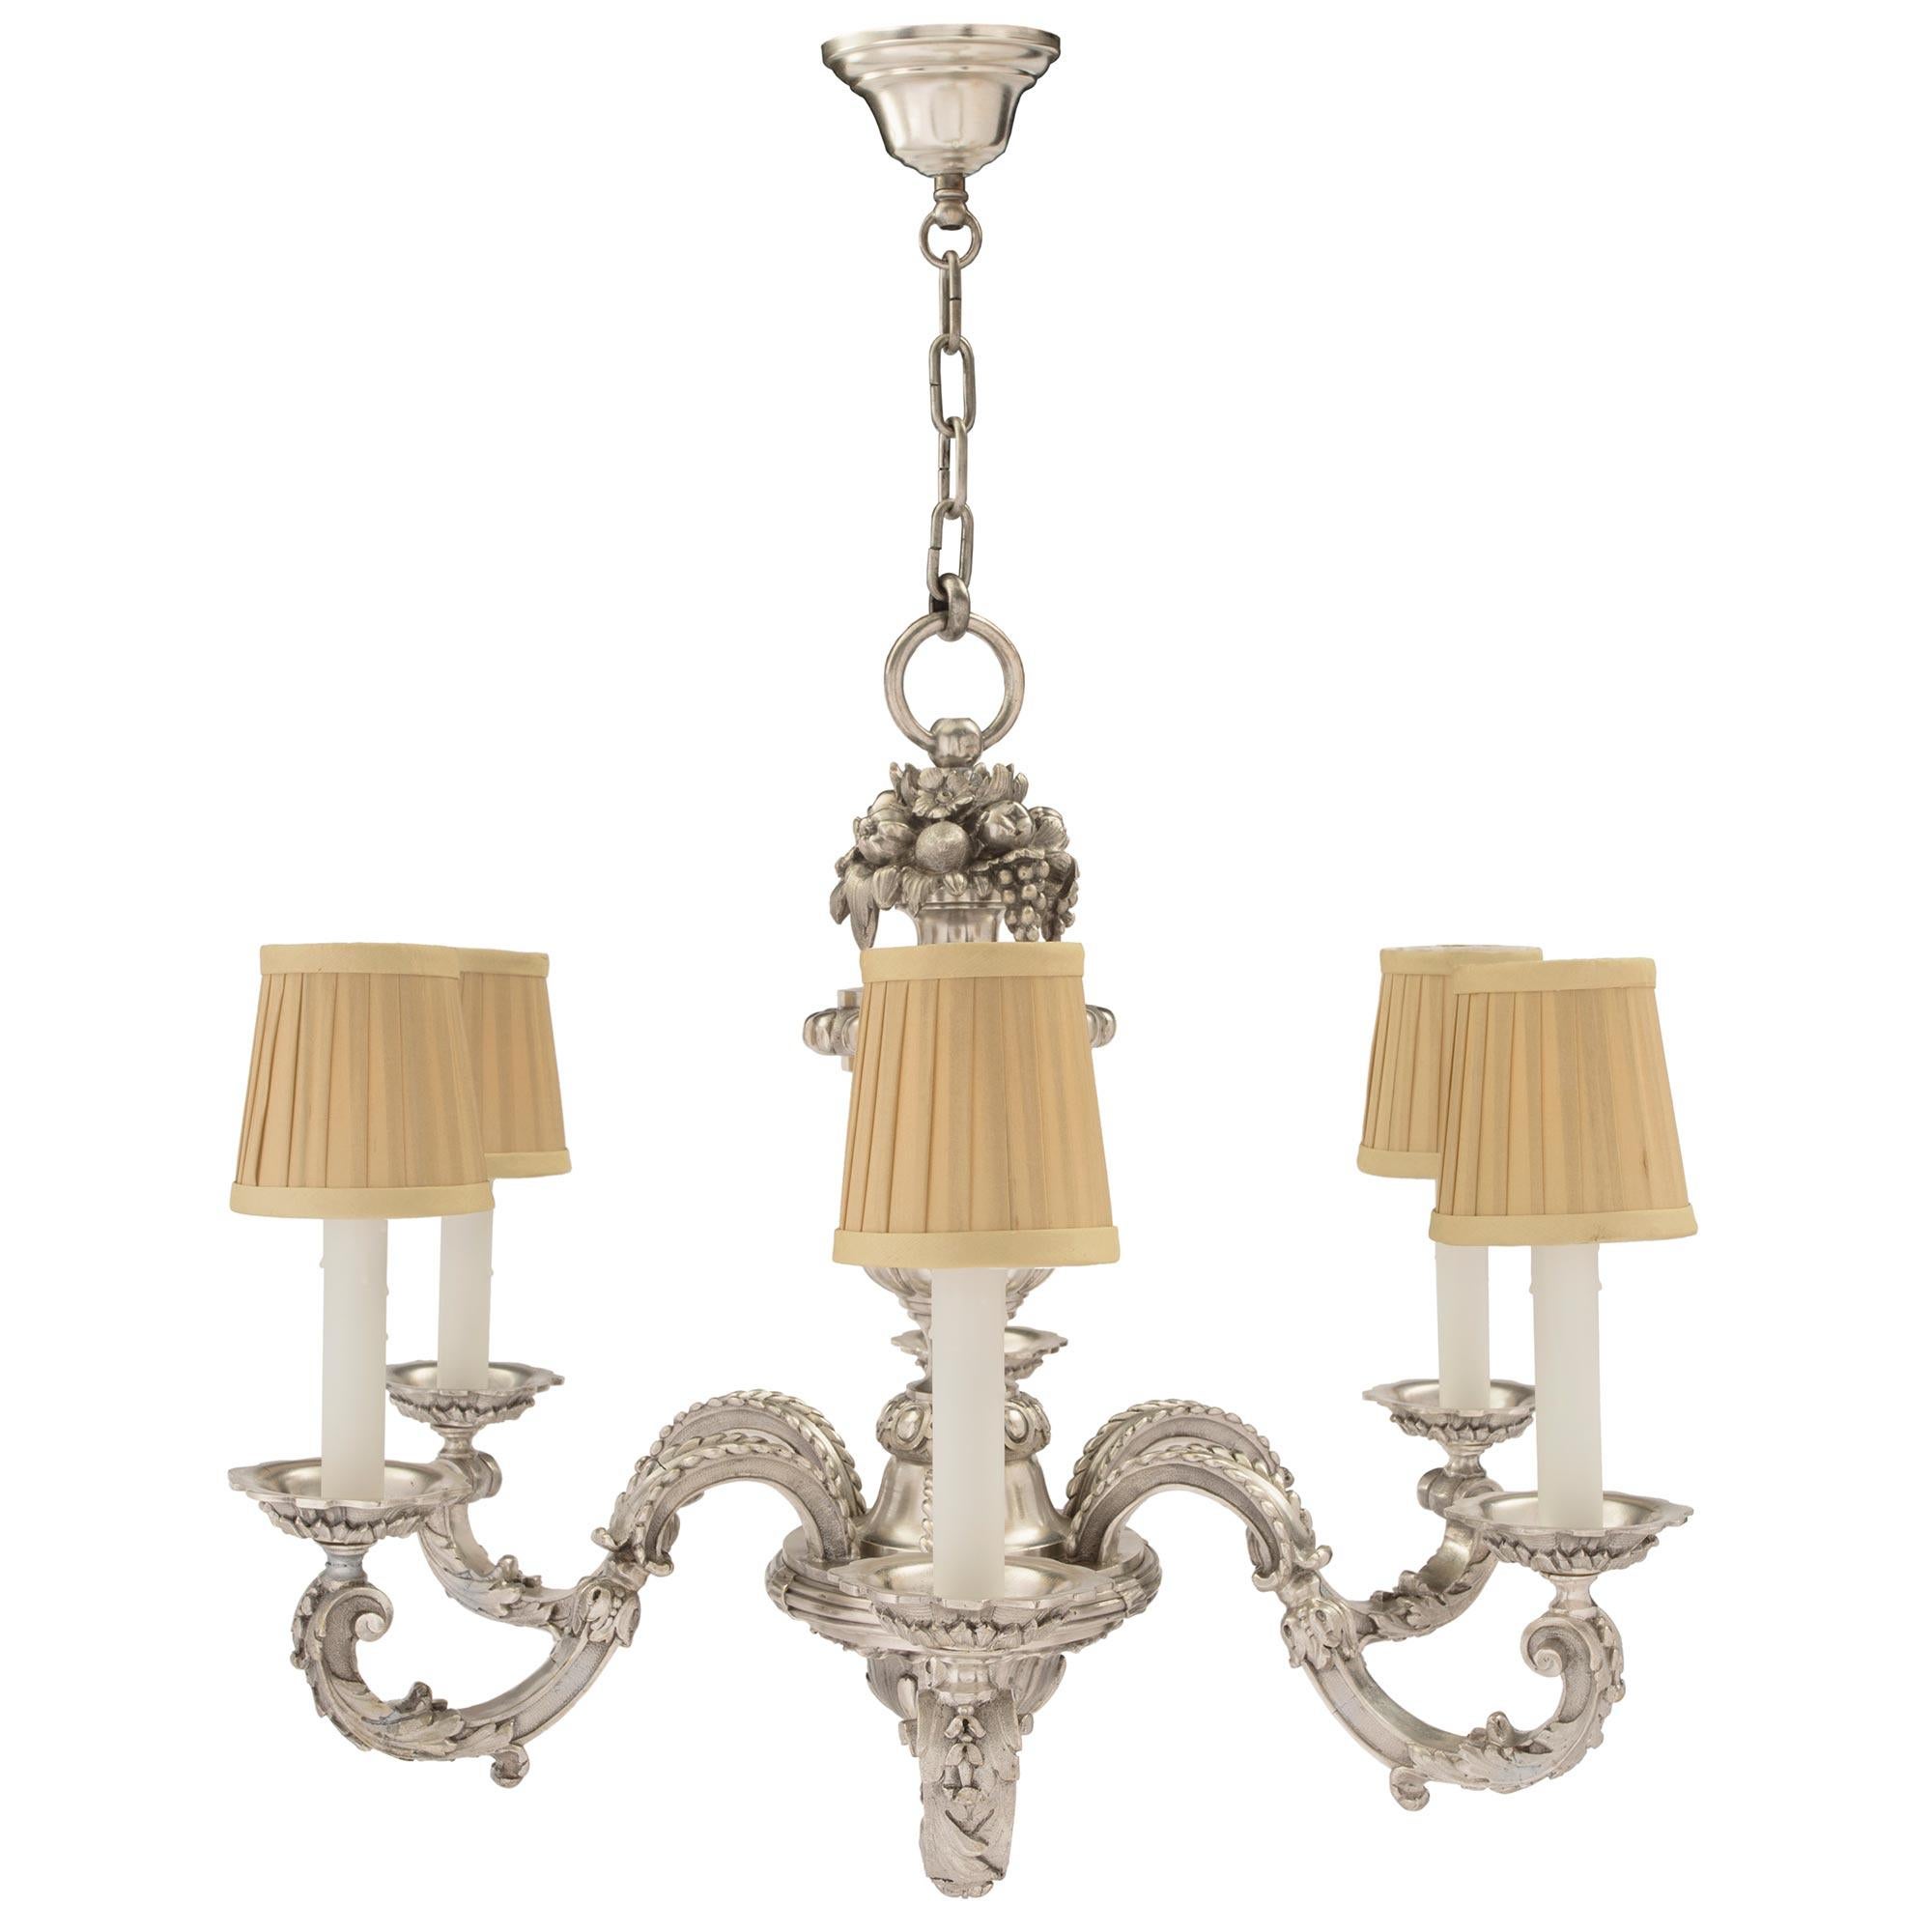 A lovely French 19th century Louis XVI st. silvered bronze six arm chandelier. The chandelier is centered by a finely detailed bottom acorn finial and a beautiful foliate pattern. The six S scrolled arms are adorned with large richly chased acanthus